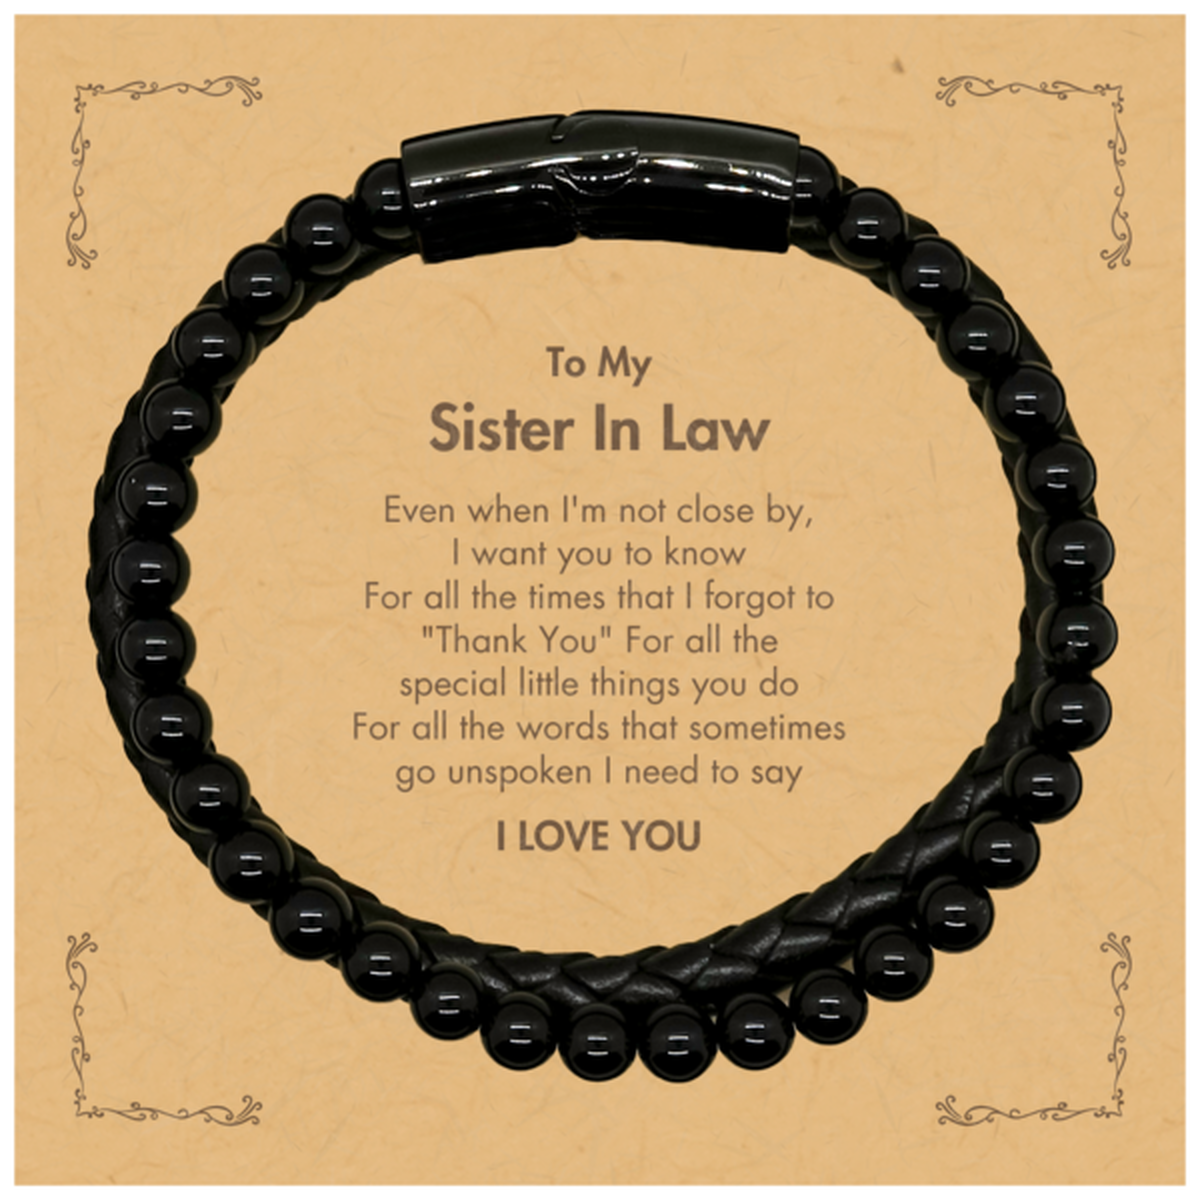 Thank You Gifts for Sister In Law, Keepsake Stone Leather Bracelets Gifts for Sister In Law Birthday Mother's day Father's Day Sister In Law For all the words That sometimes go unspoken I need to say I LOVE YOU